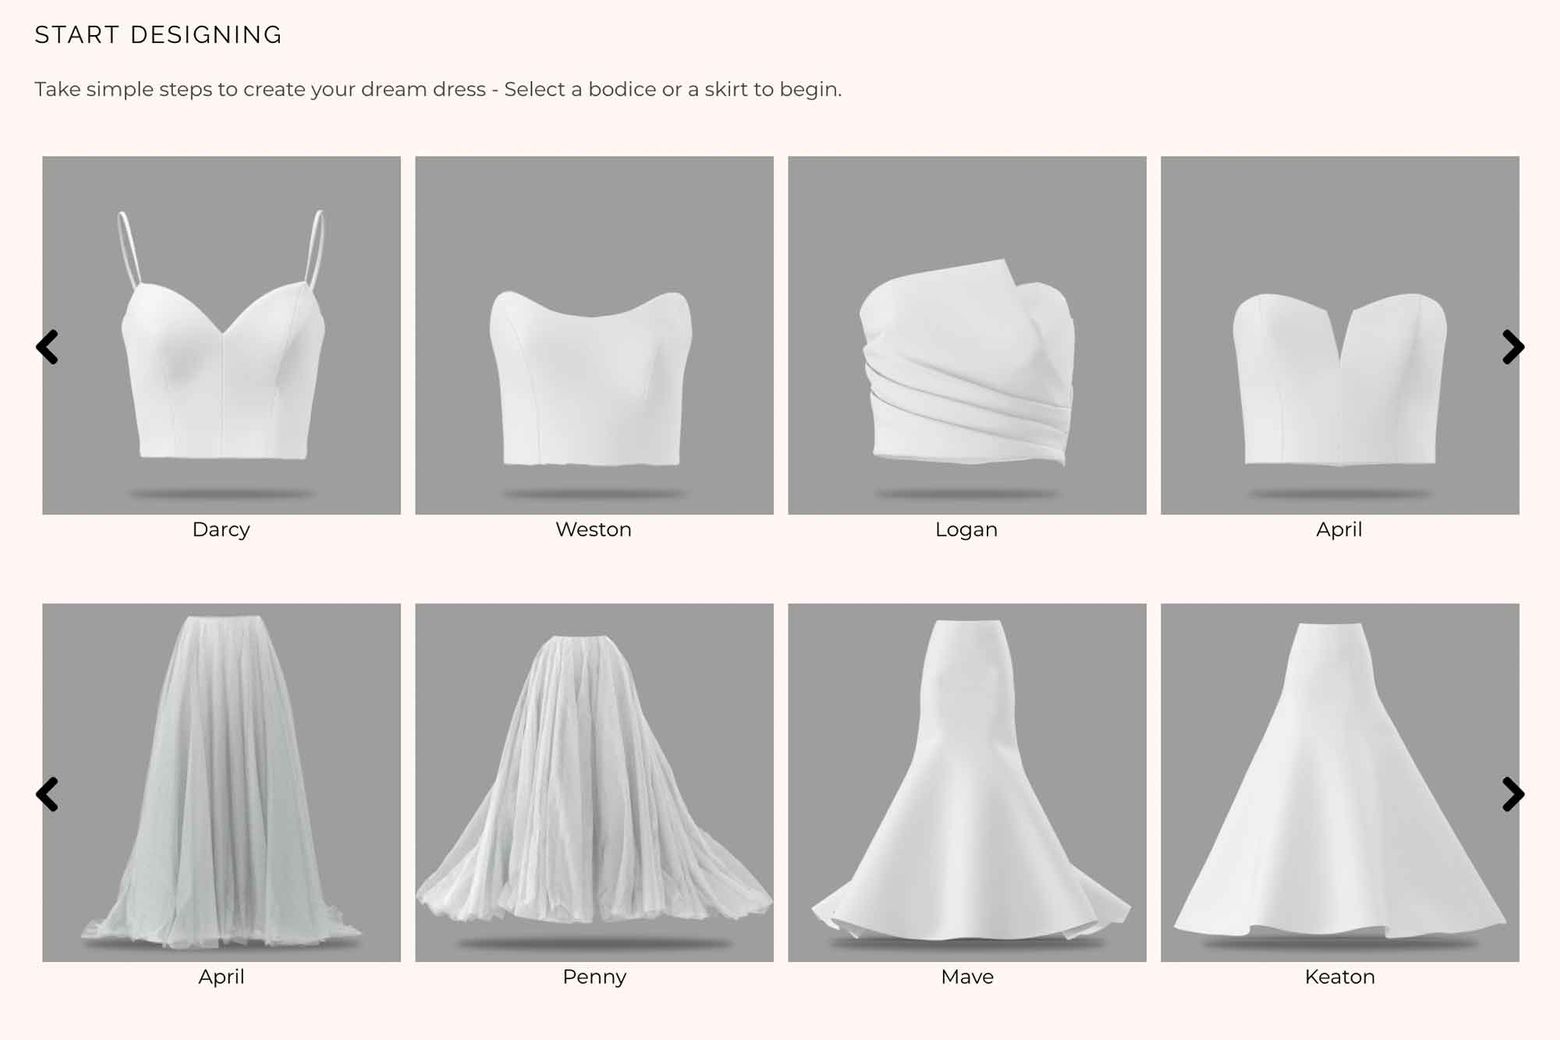 Customized wedding dresses in a few clicks | The Seattle Times